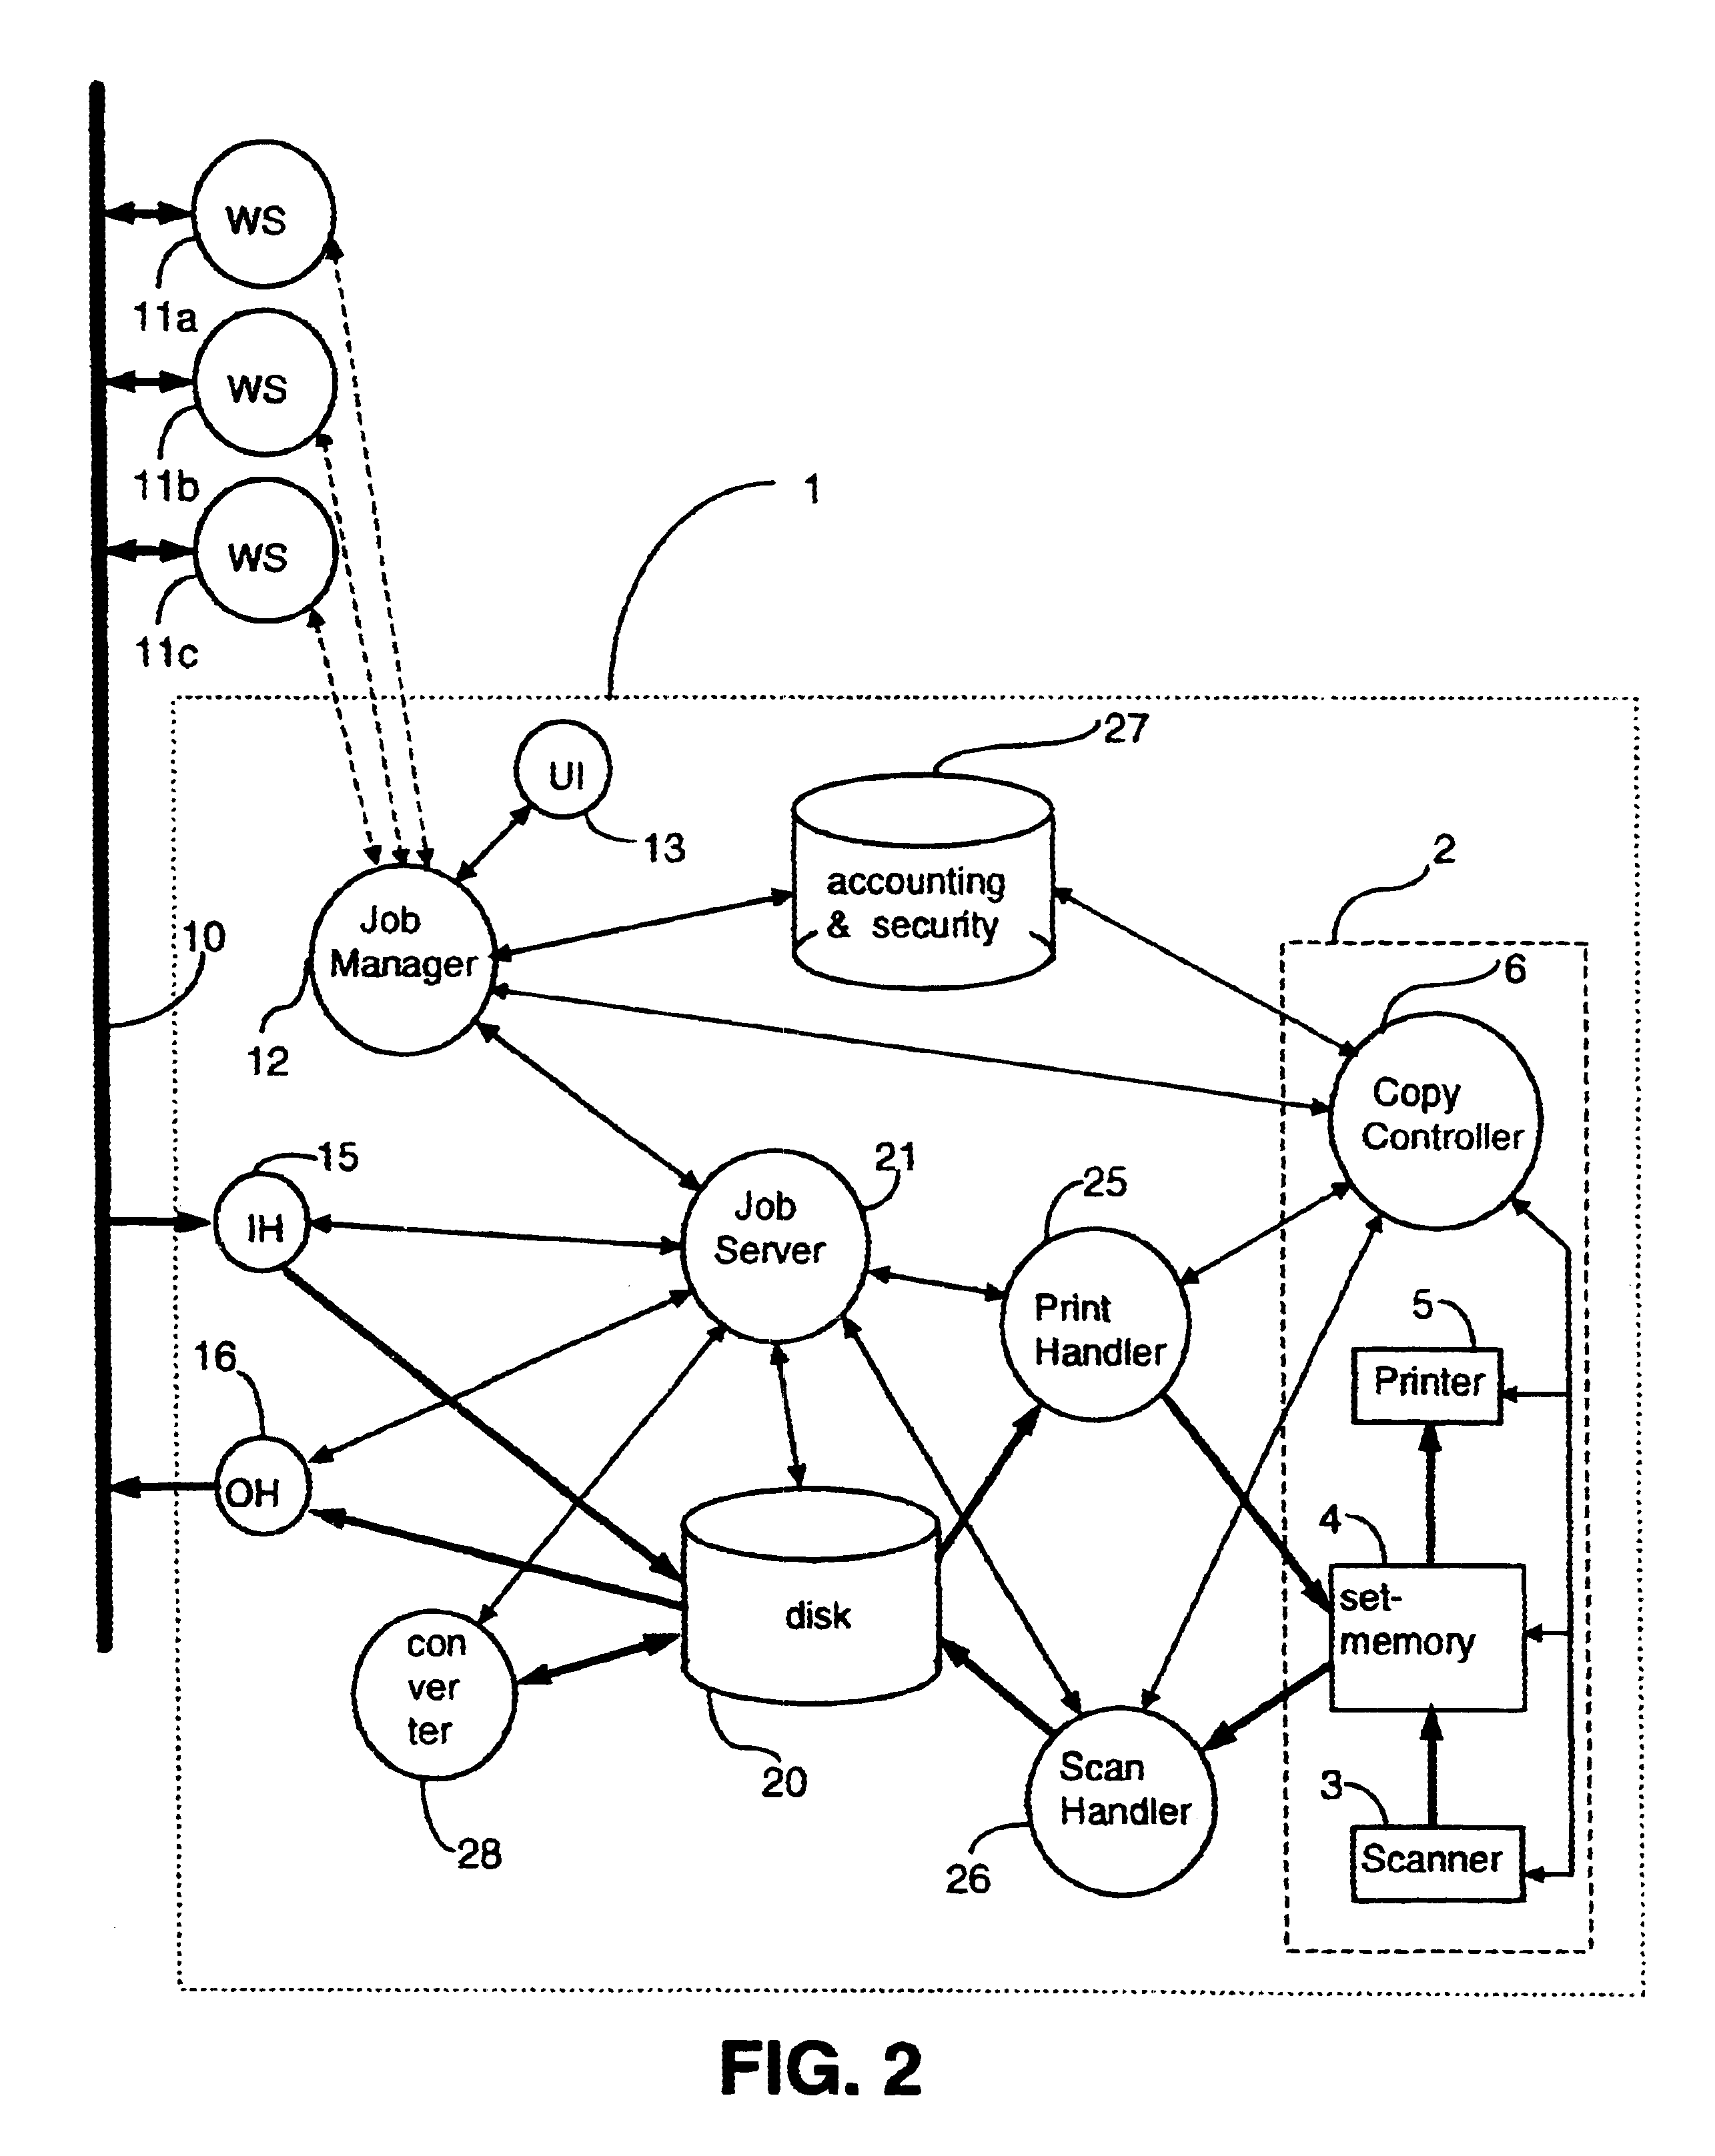 Digital image processing apparatus and method with storage of Non-finishable jobs